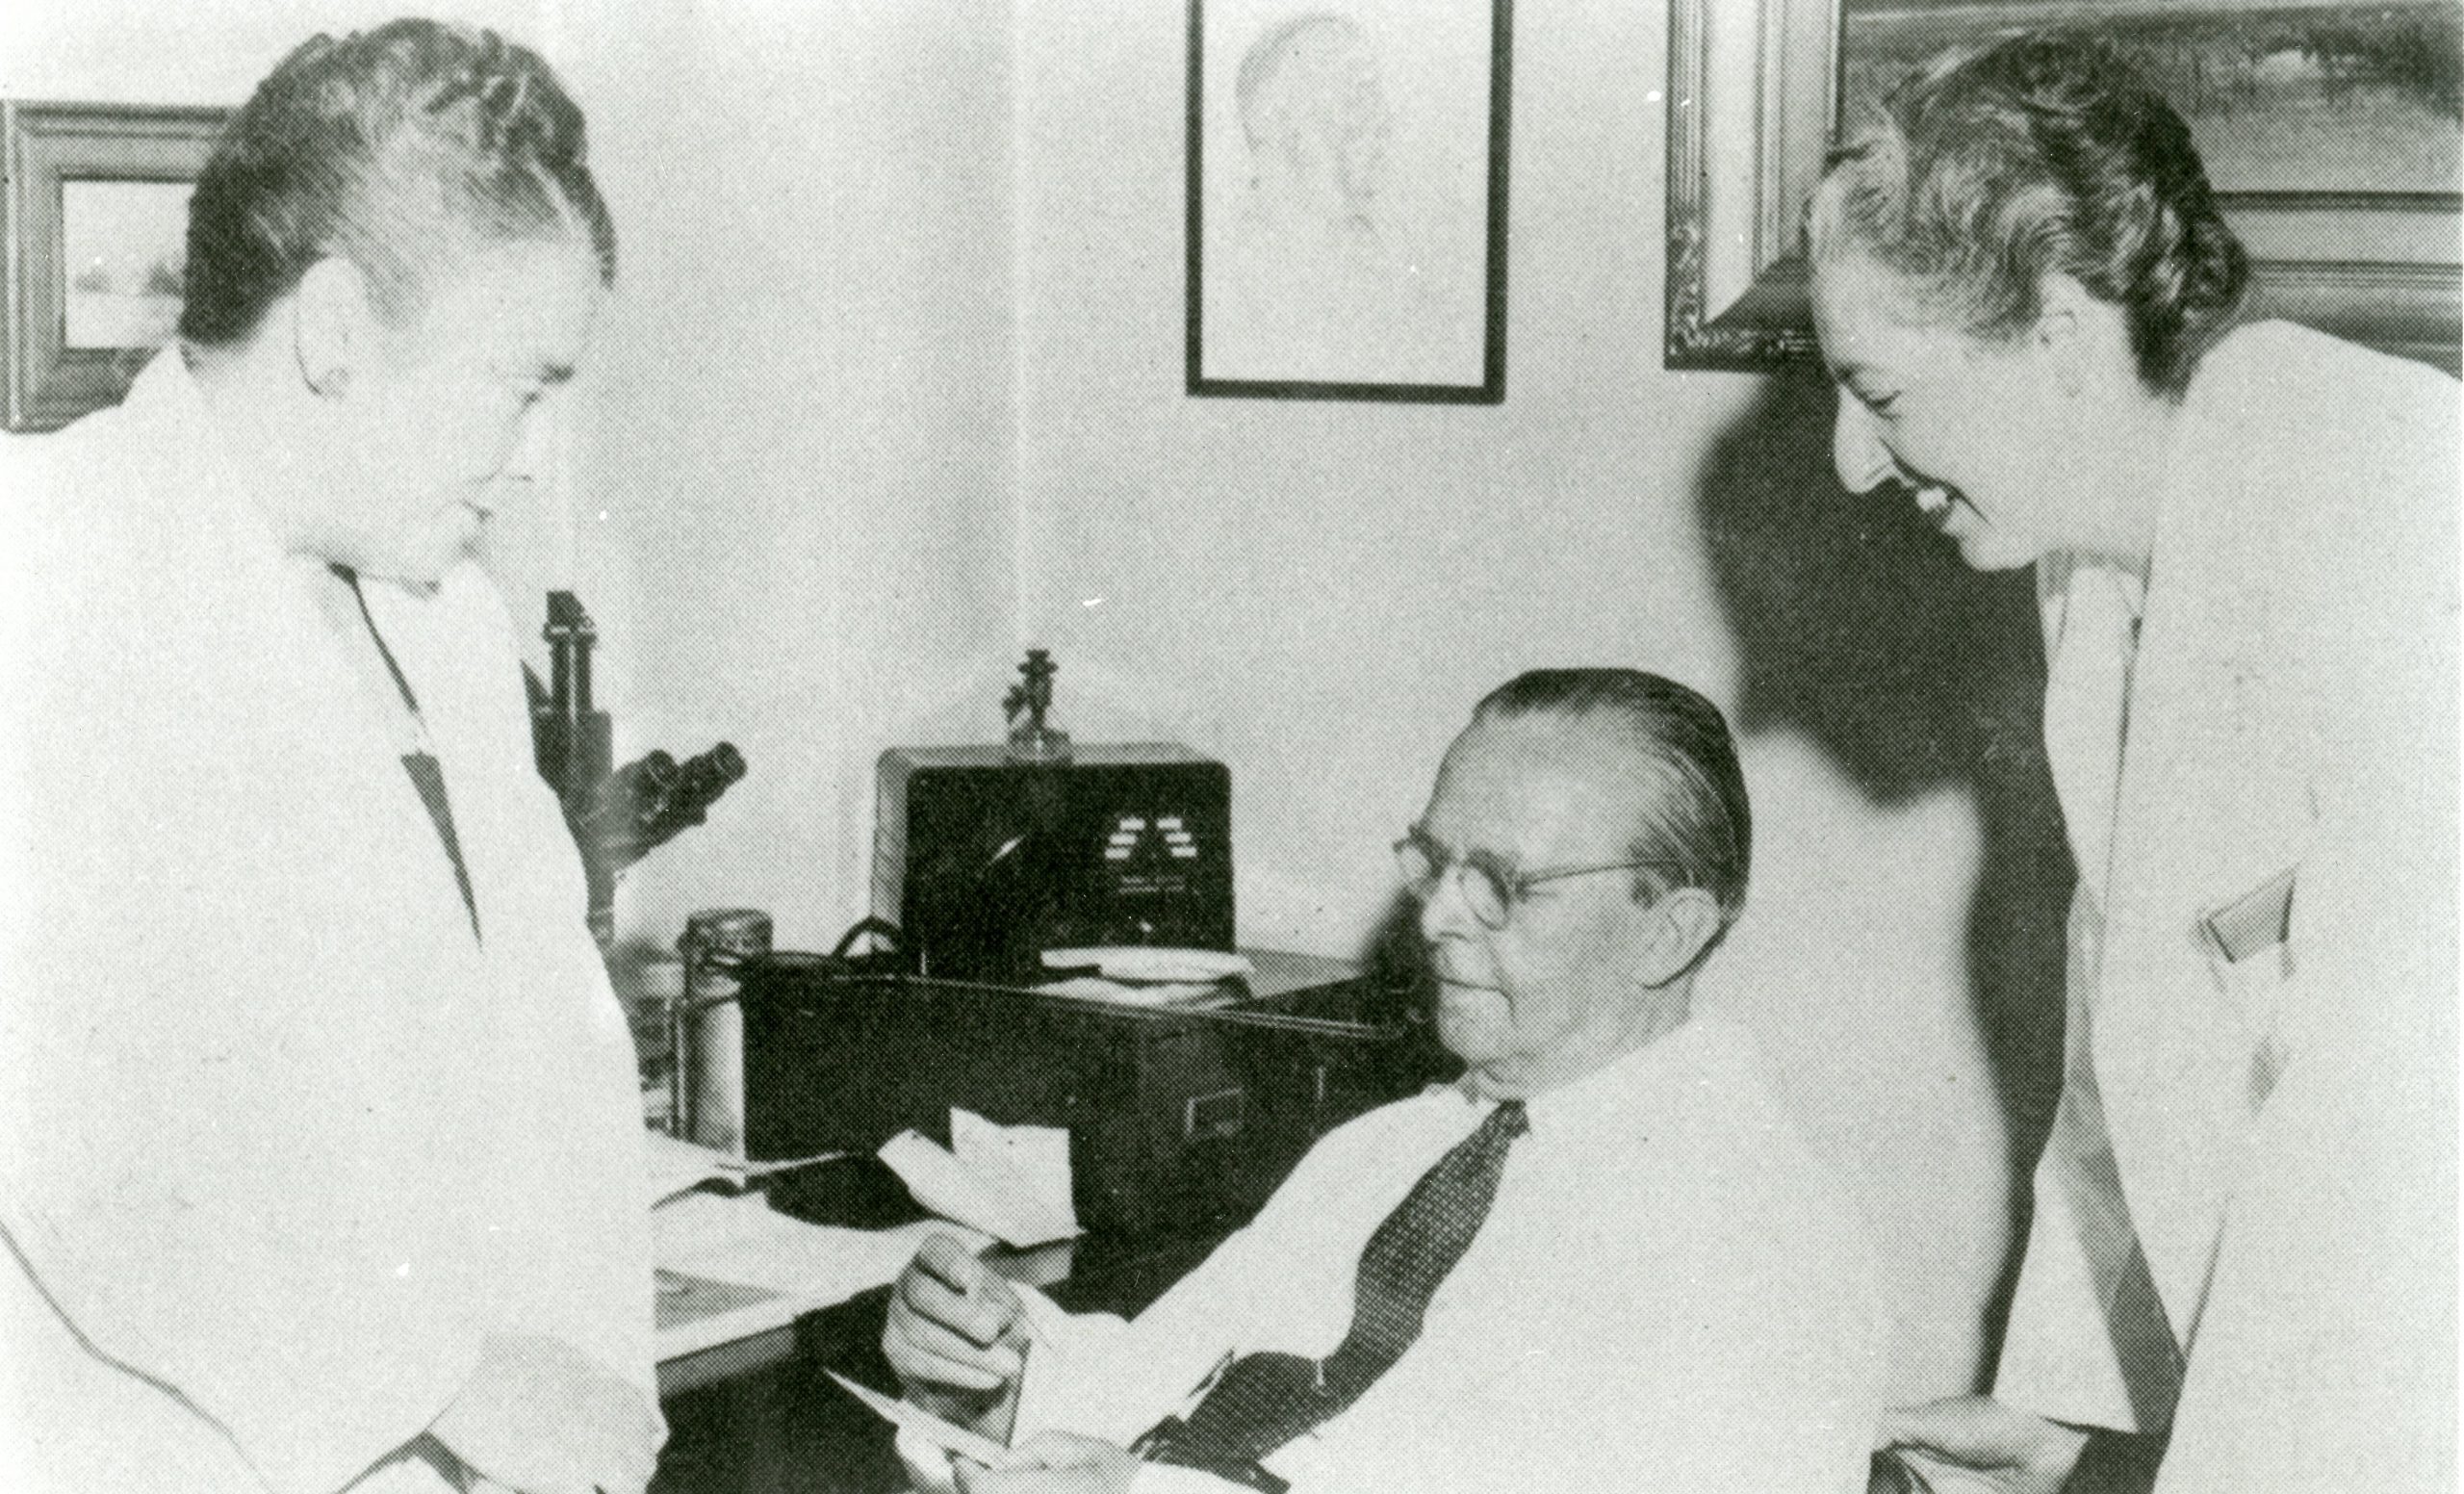 A black and white photo of two women in lab-coats speaking with an older man in a dress shirt and tie.